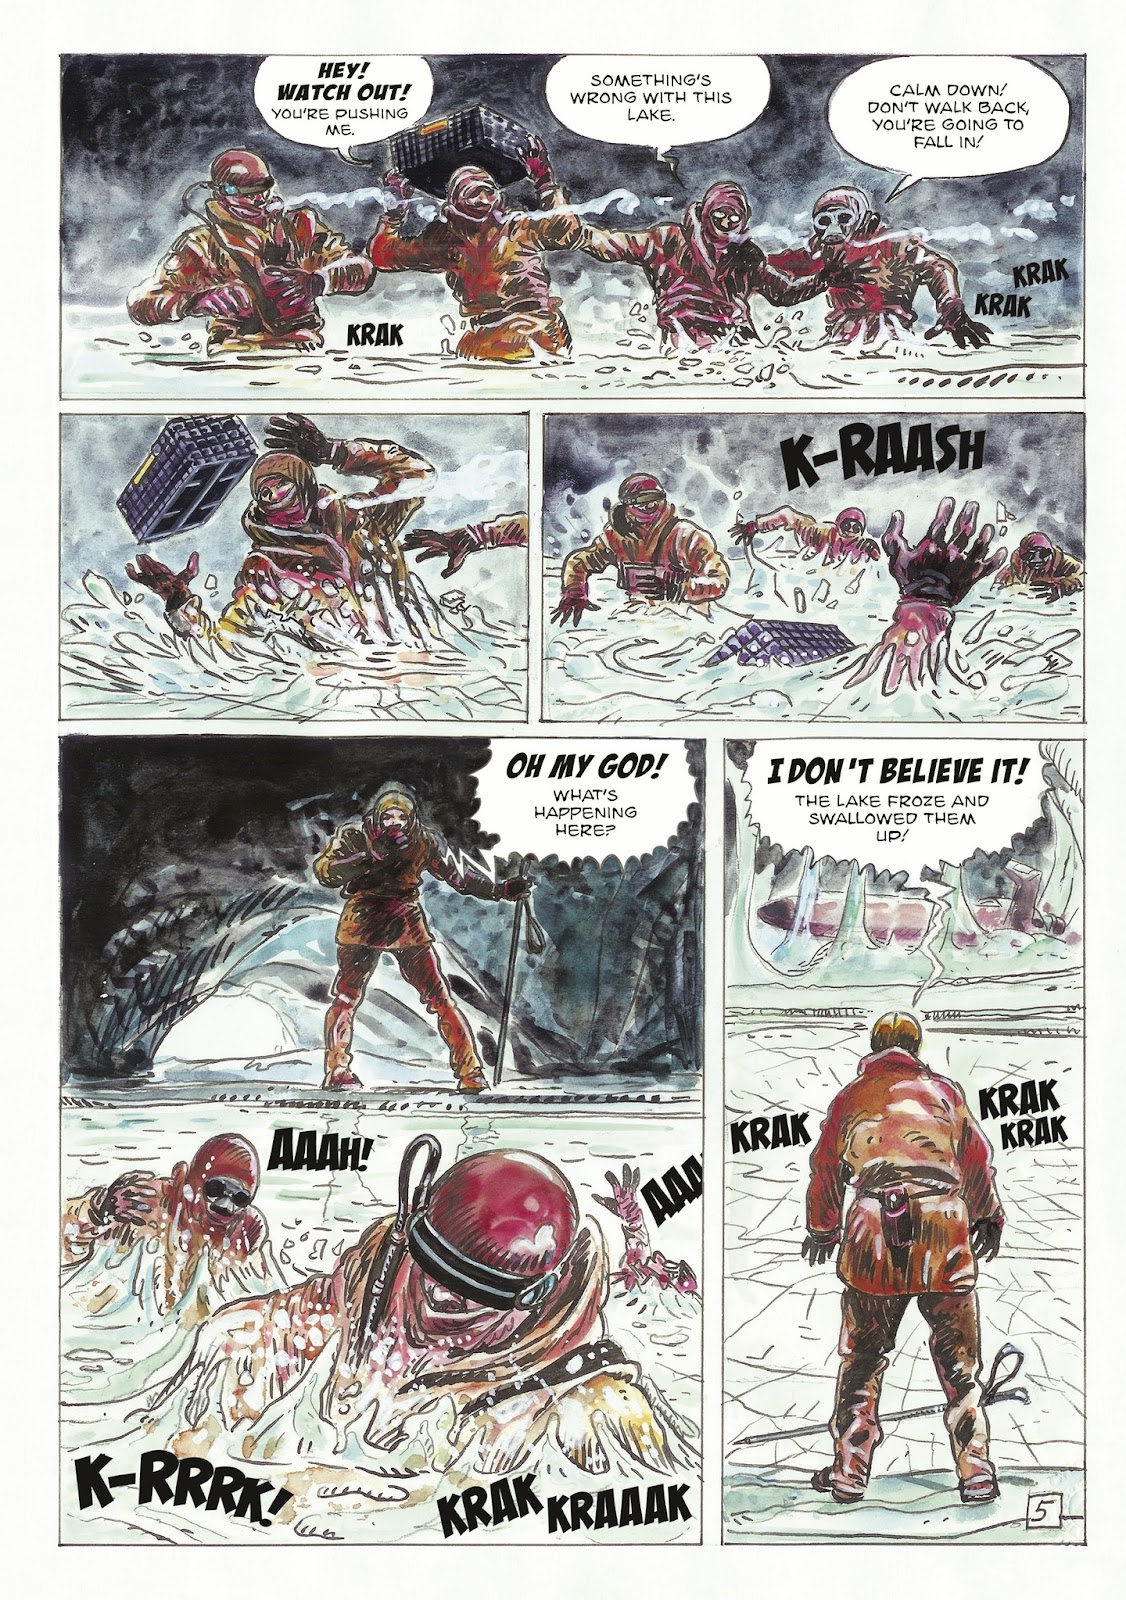 The Man With the Bear issue 1 - Page 7